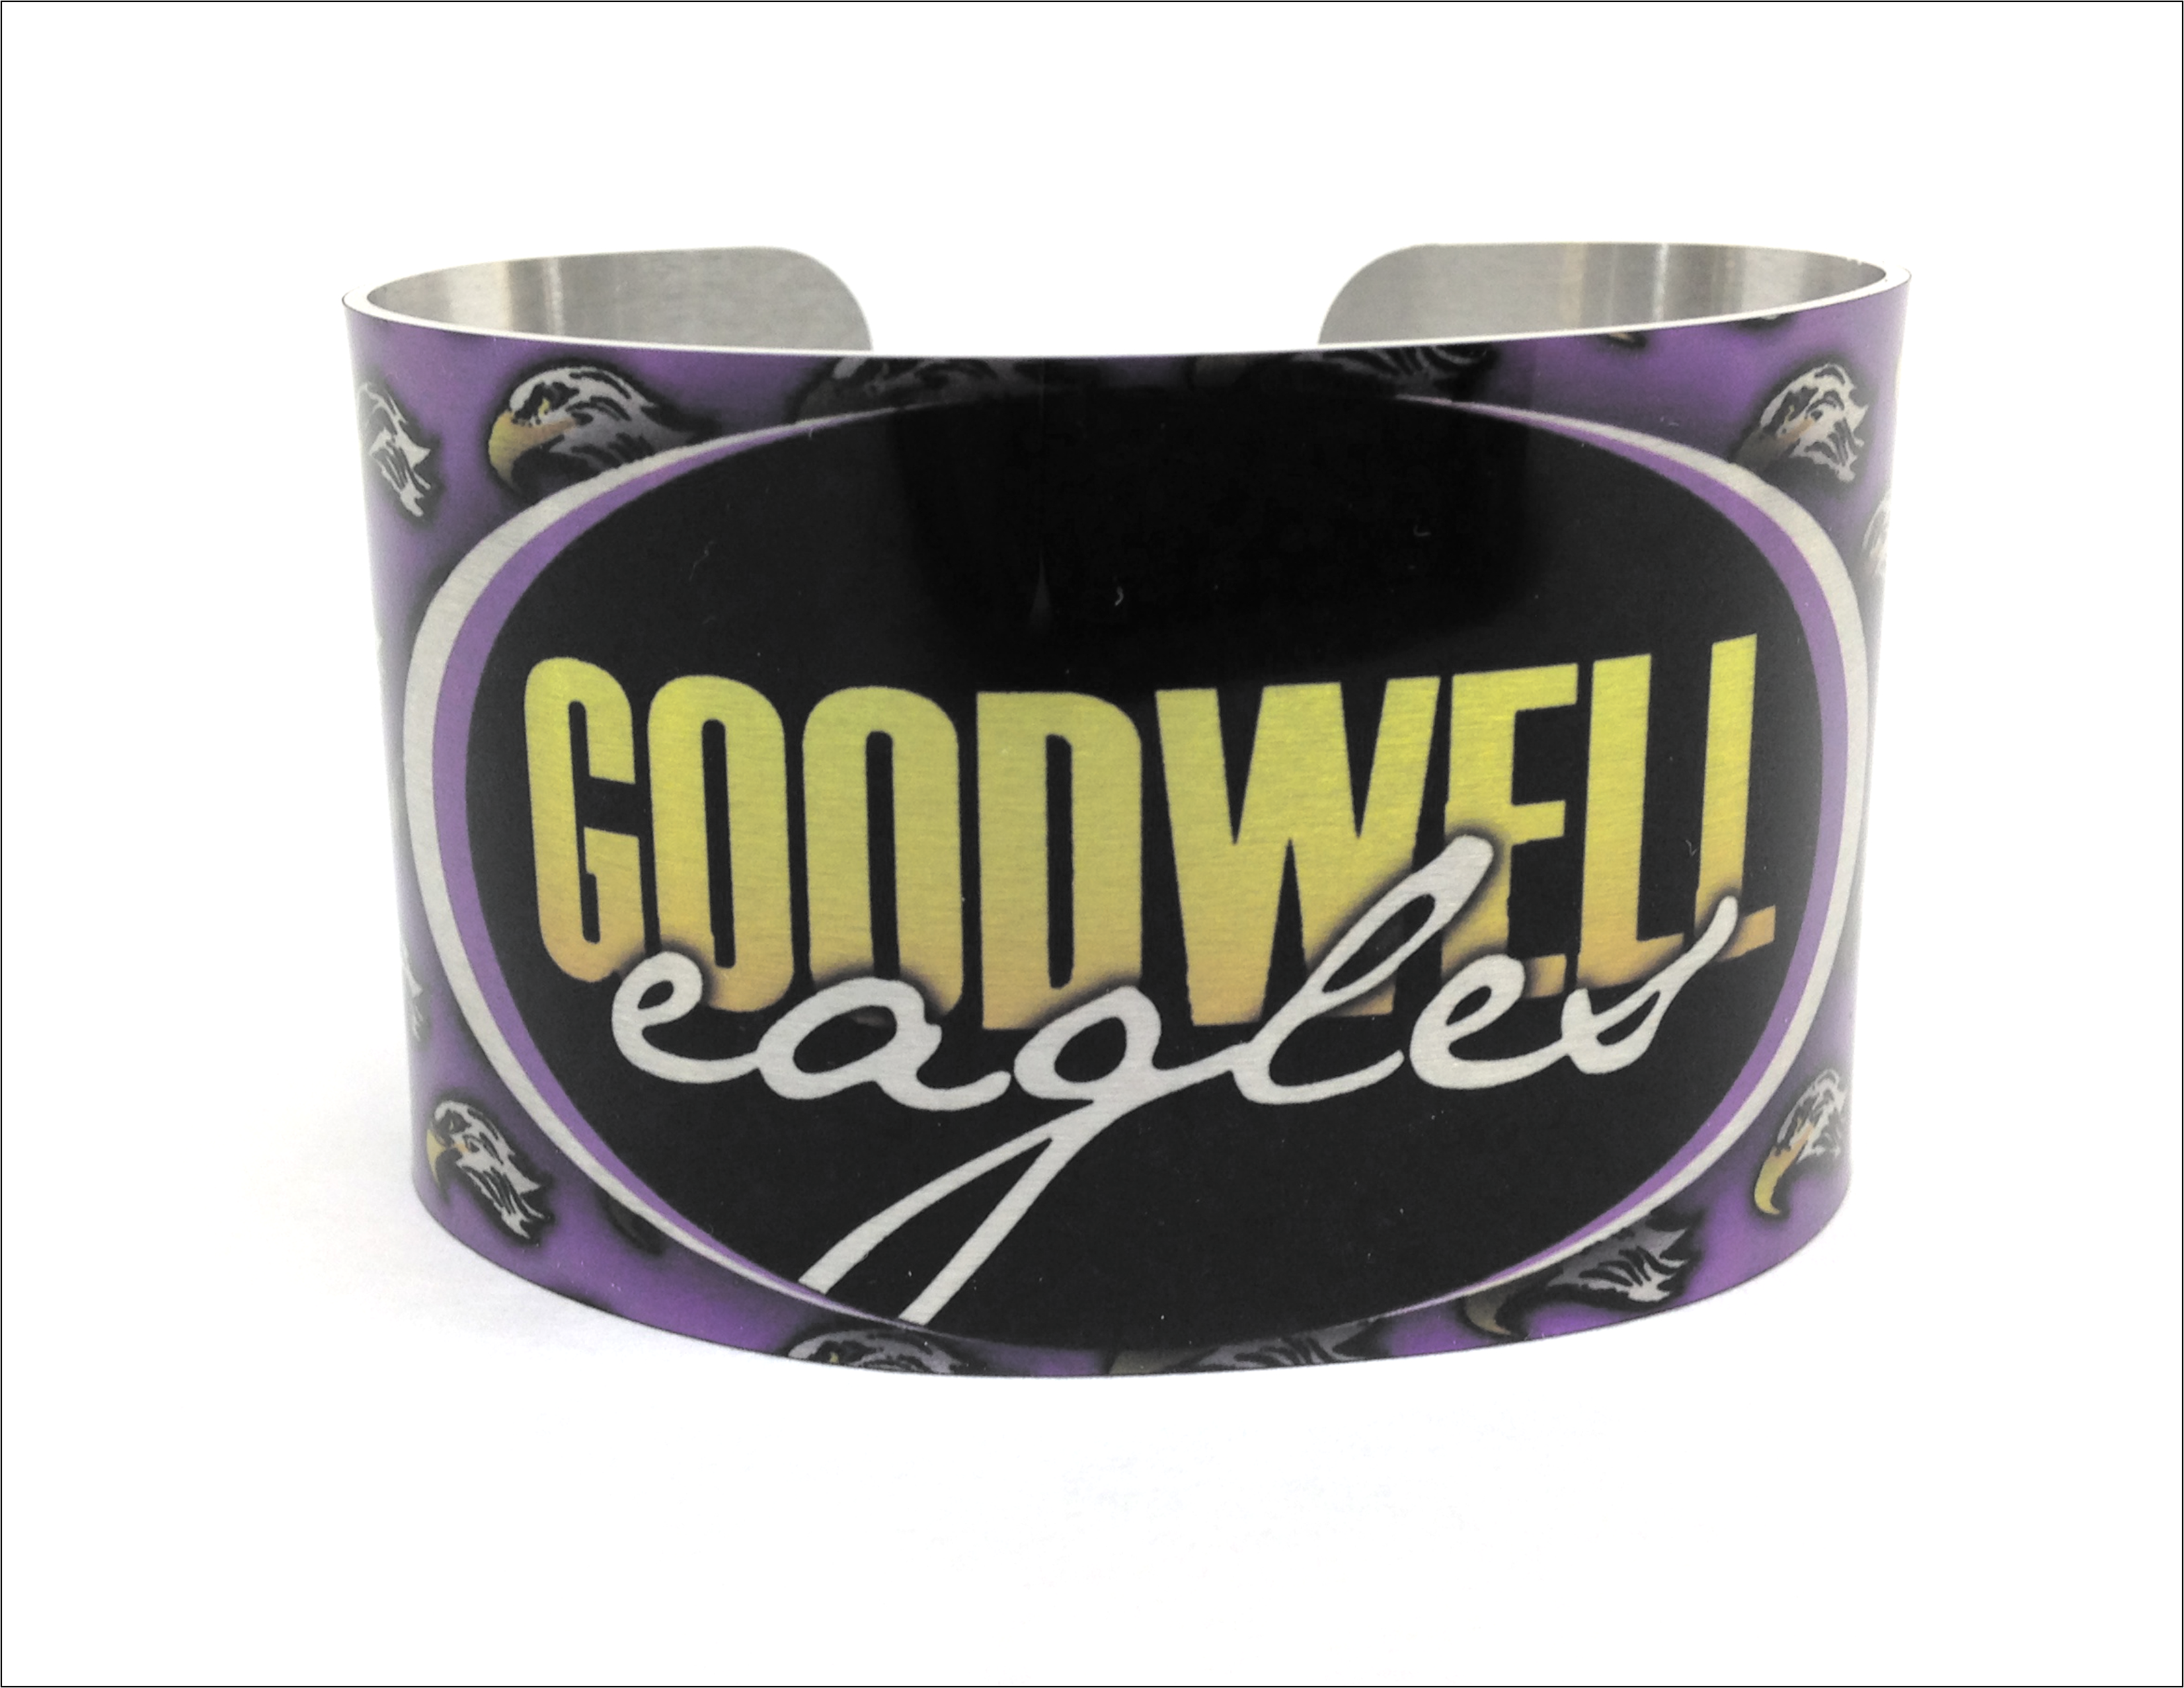 Eagle Large Cuff made with sublimation printing